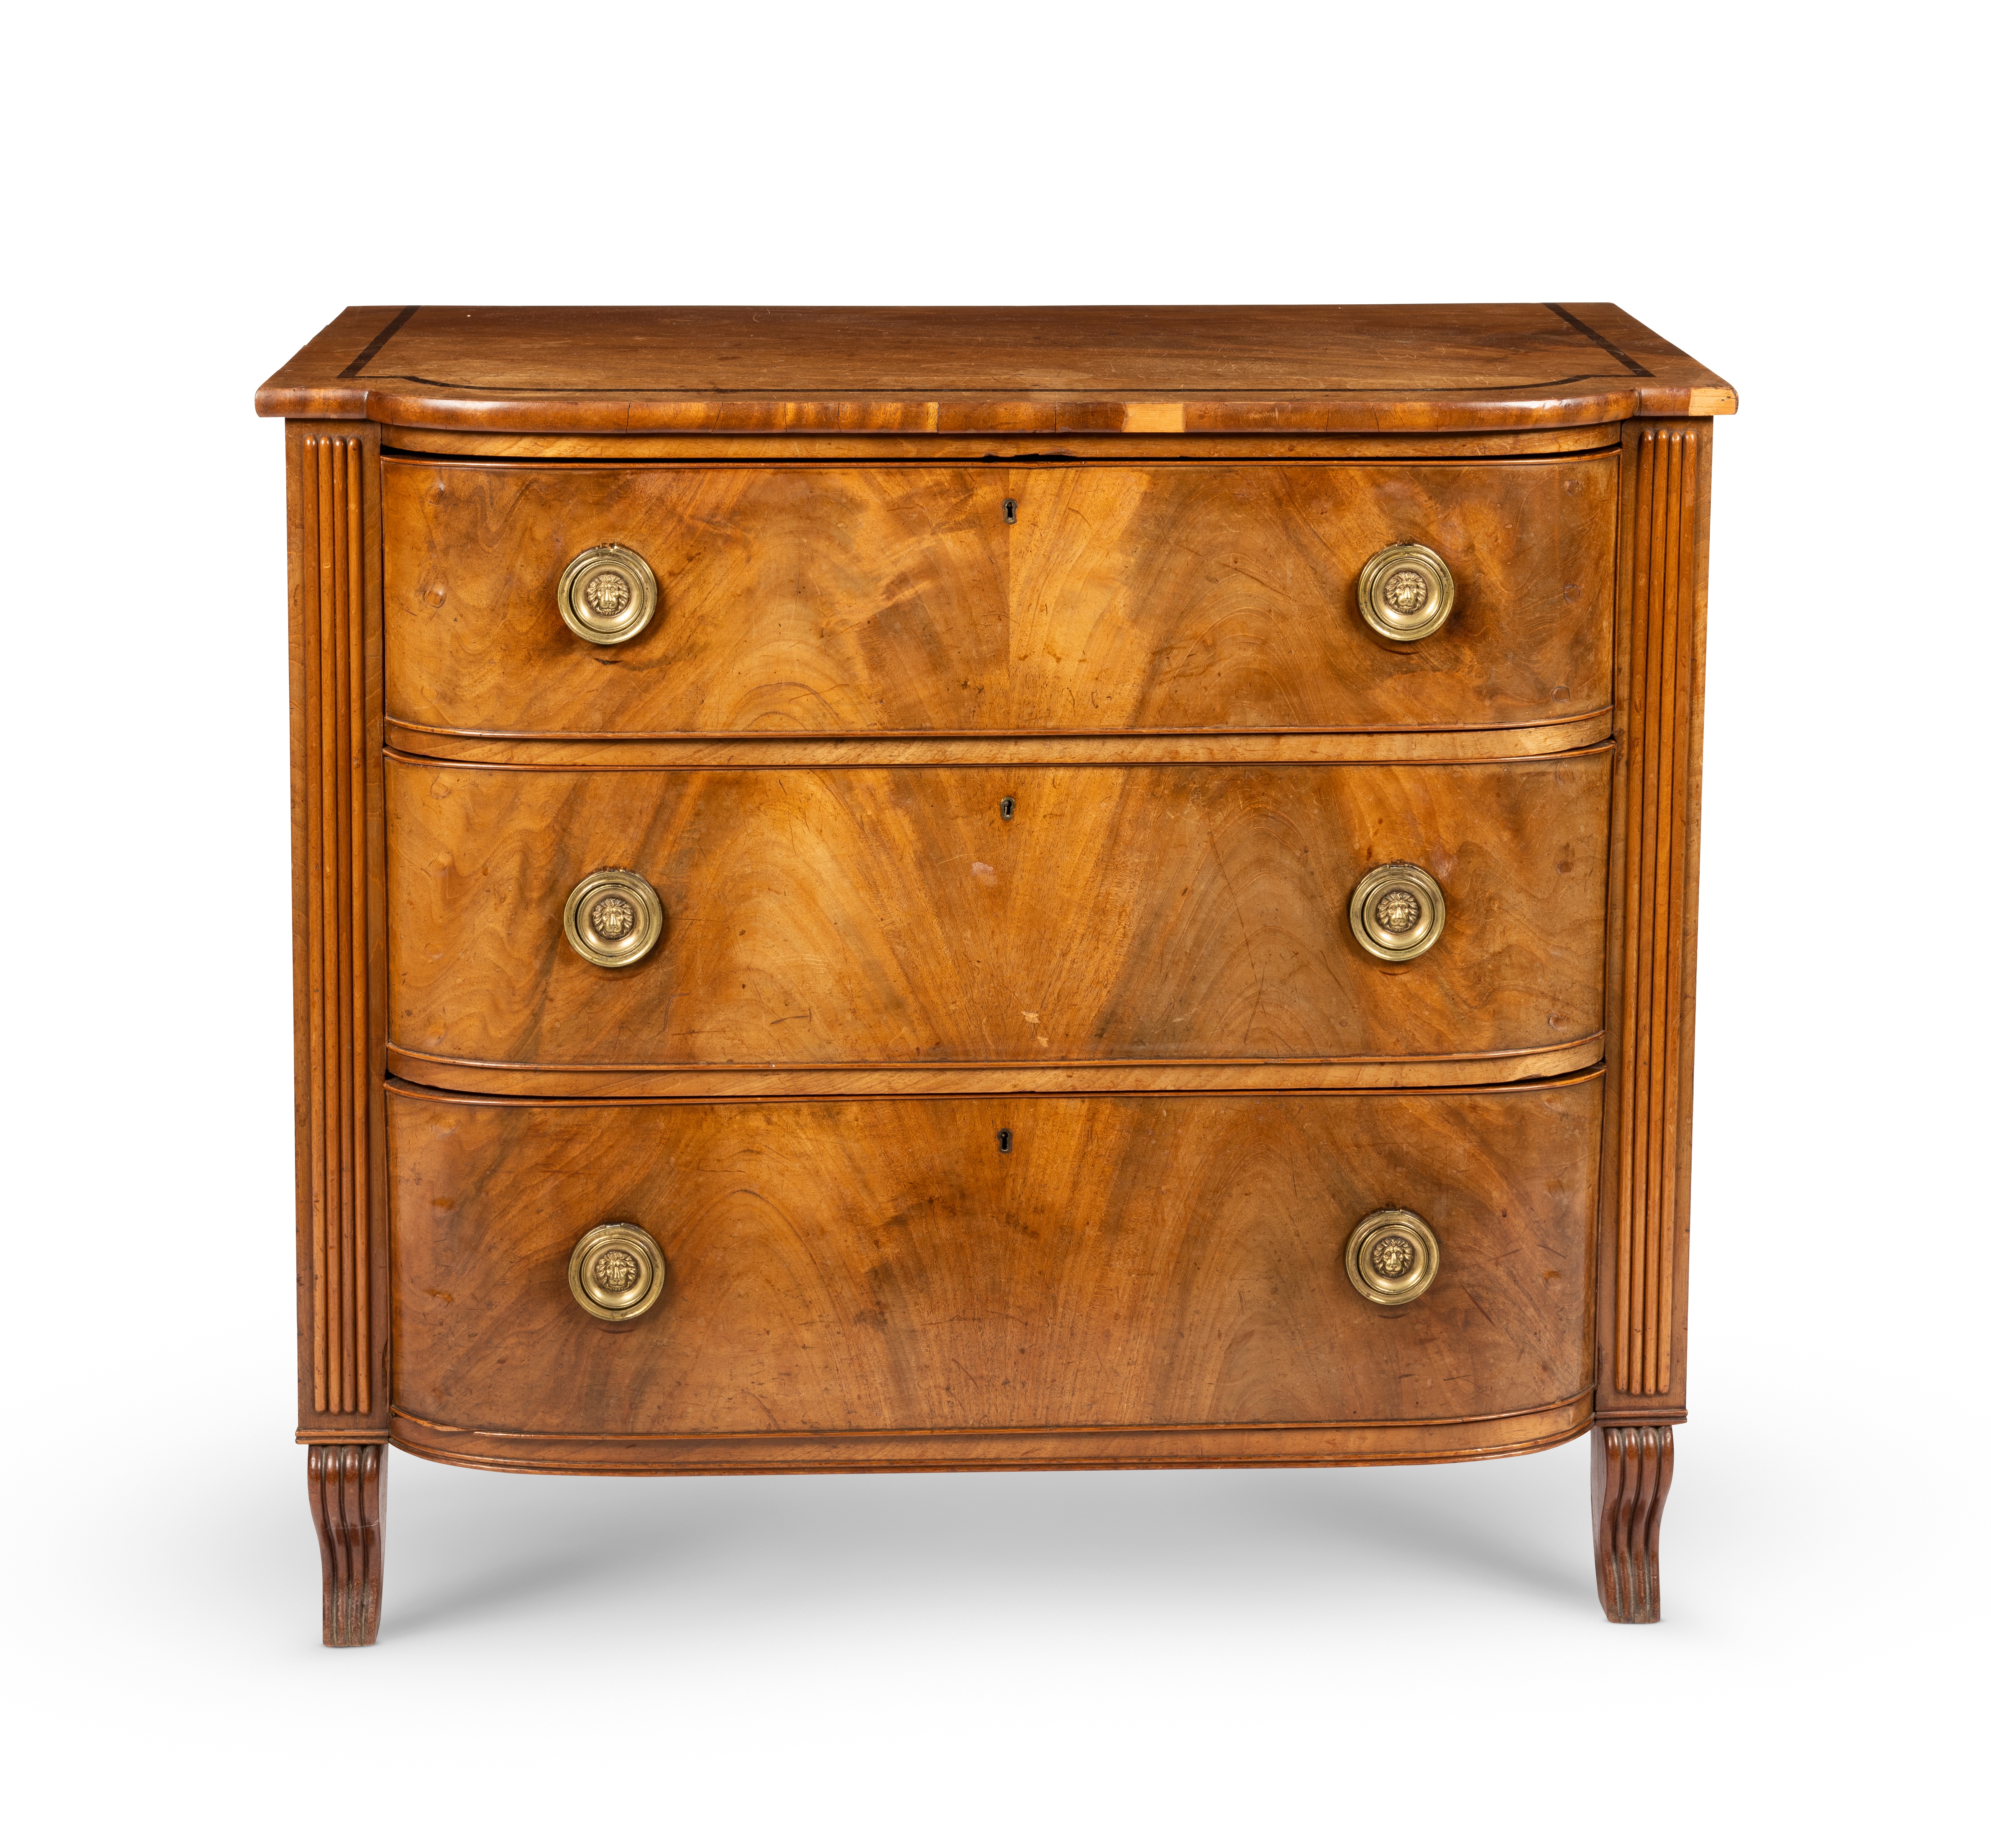 A Regency mahogany and rosewood banded bowfront chest